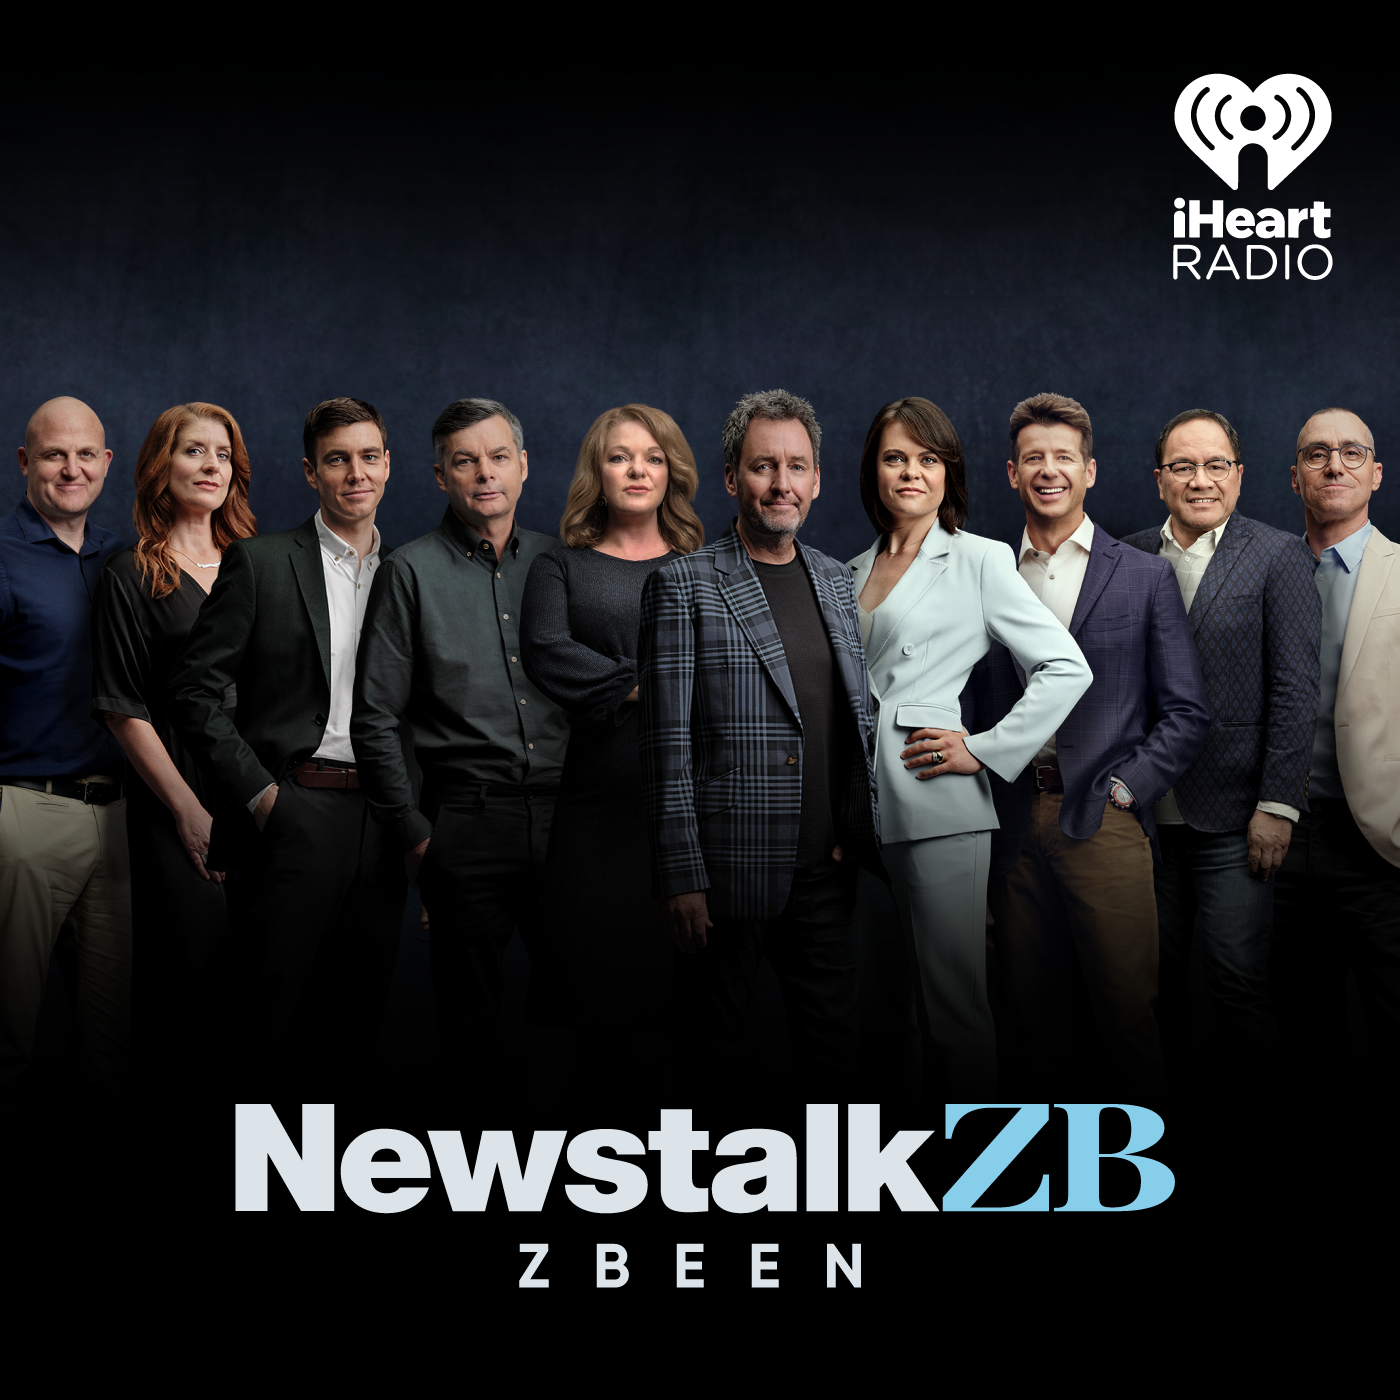 NEWSTALK ZBEEN: Living In an Idiocracy